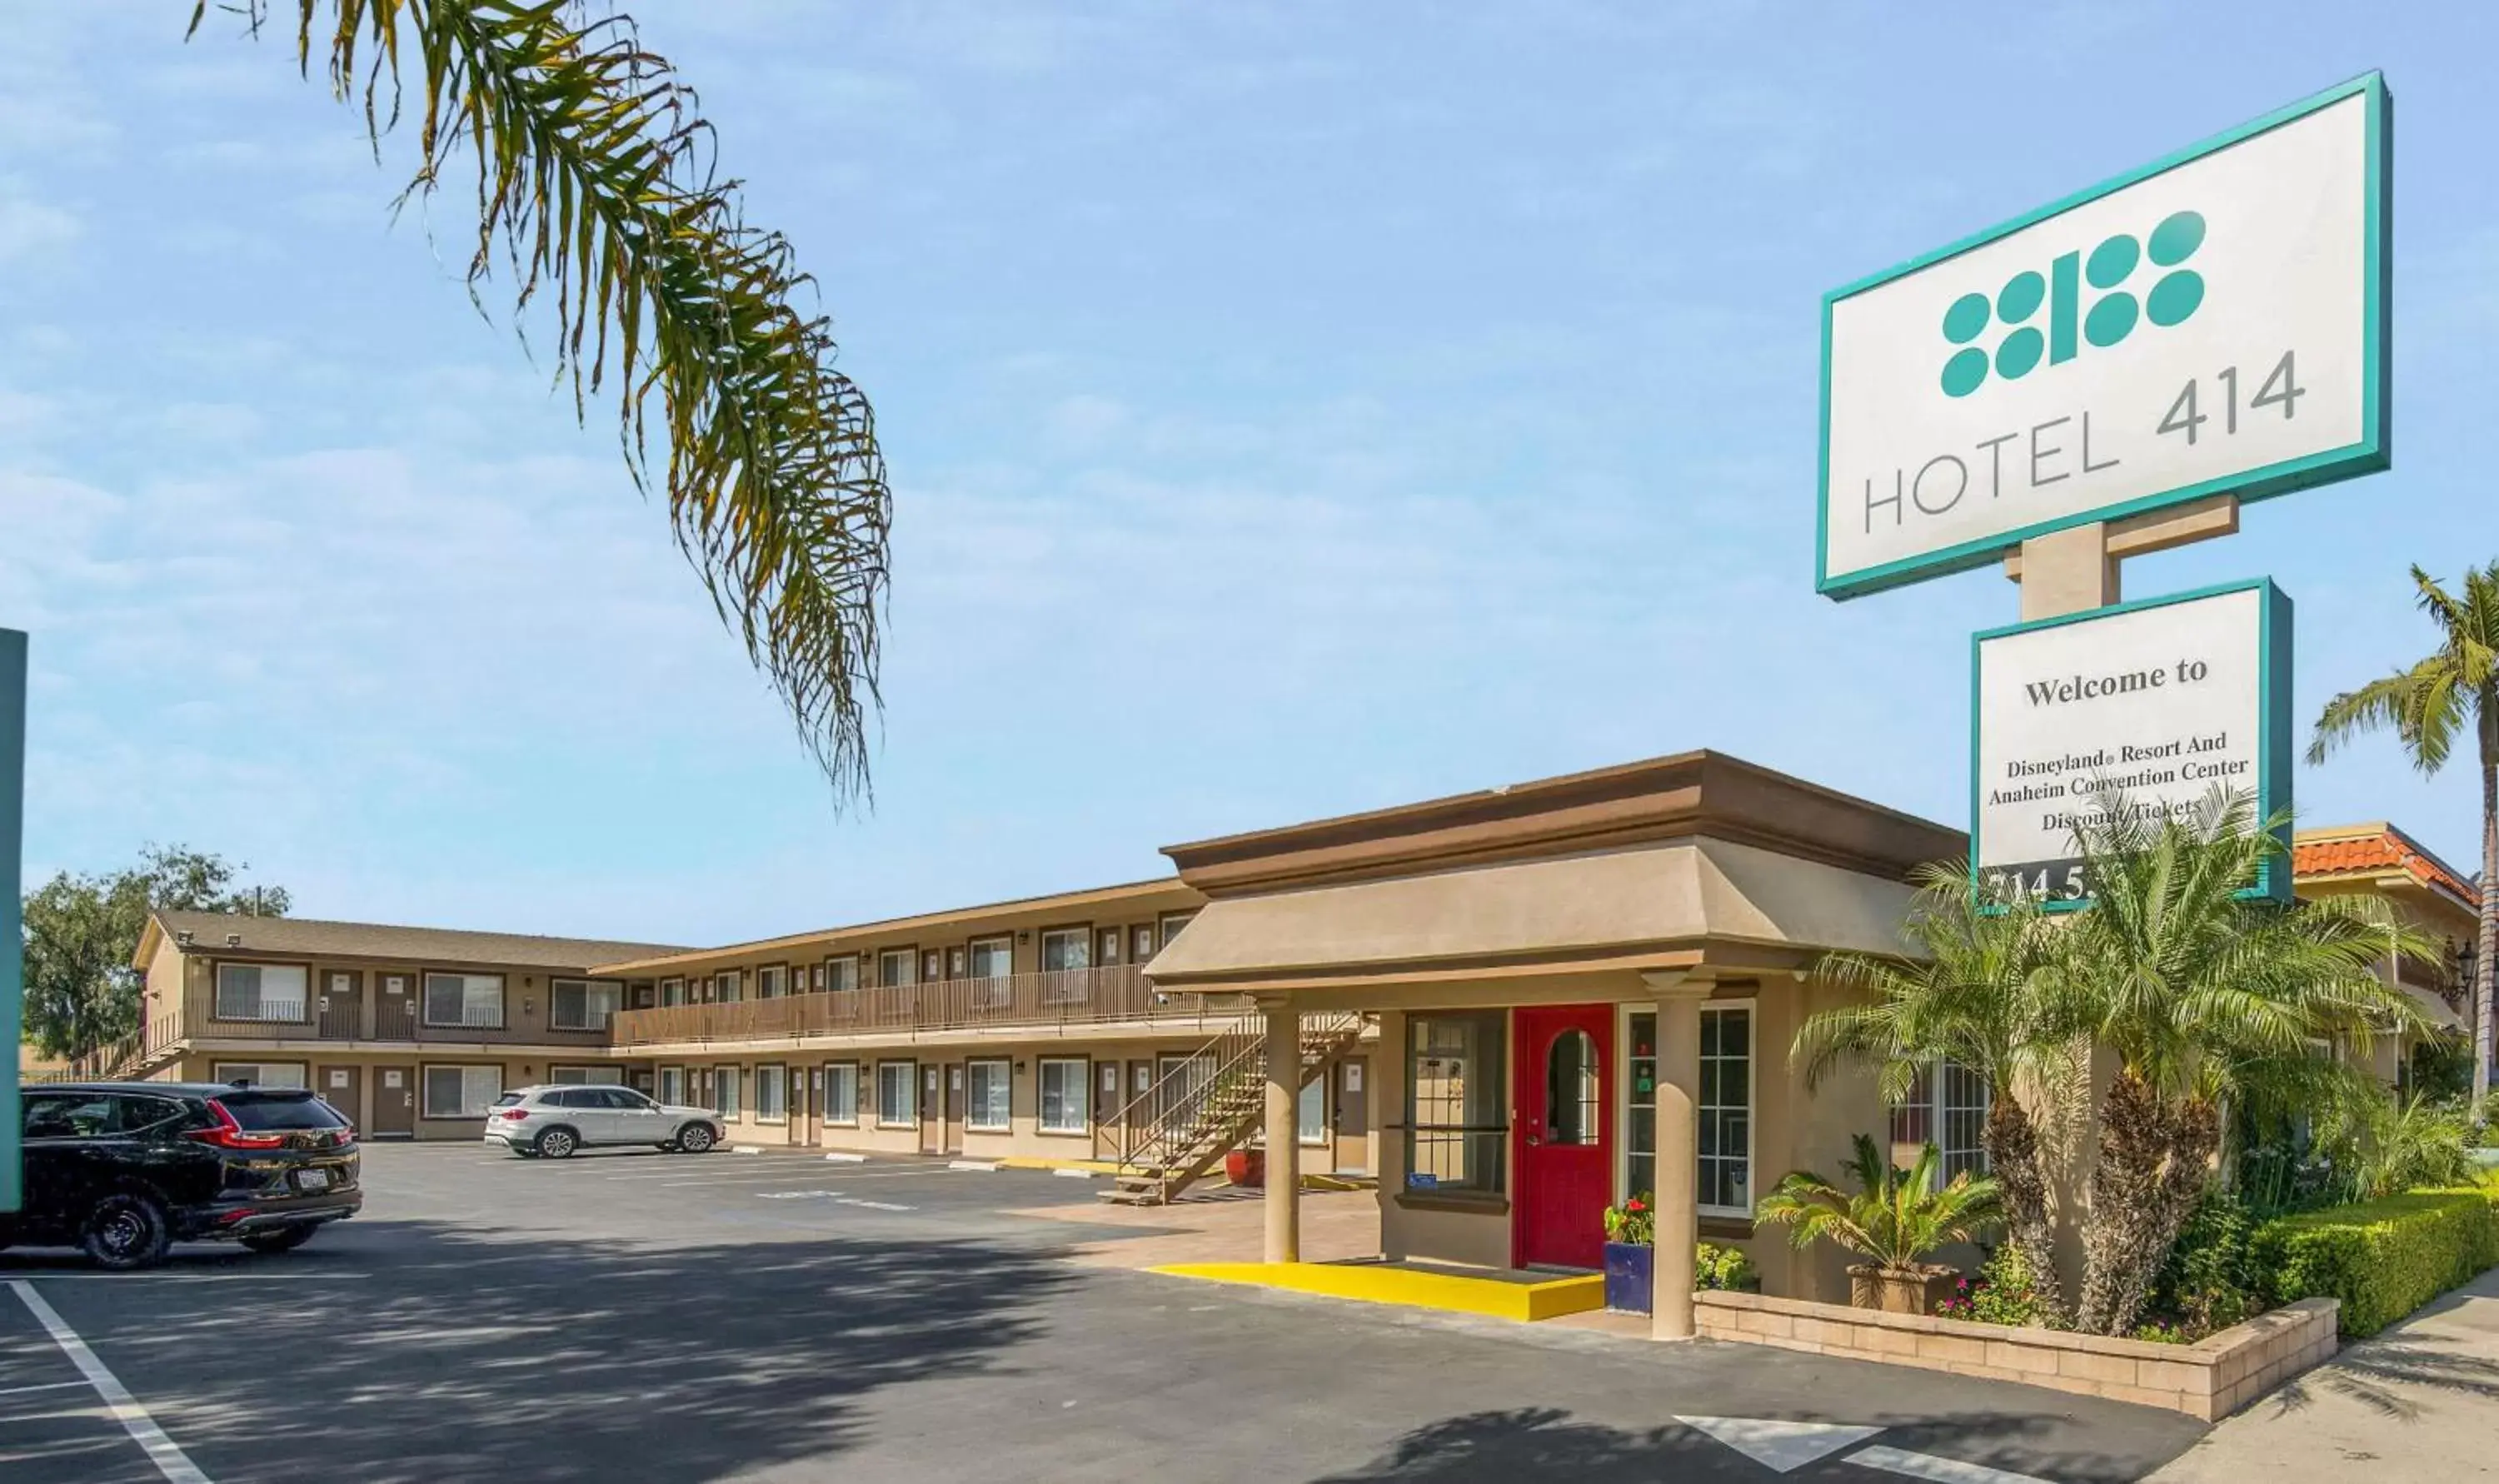 Property Building in Hotel 414 Anaheim